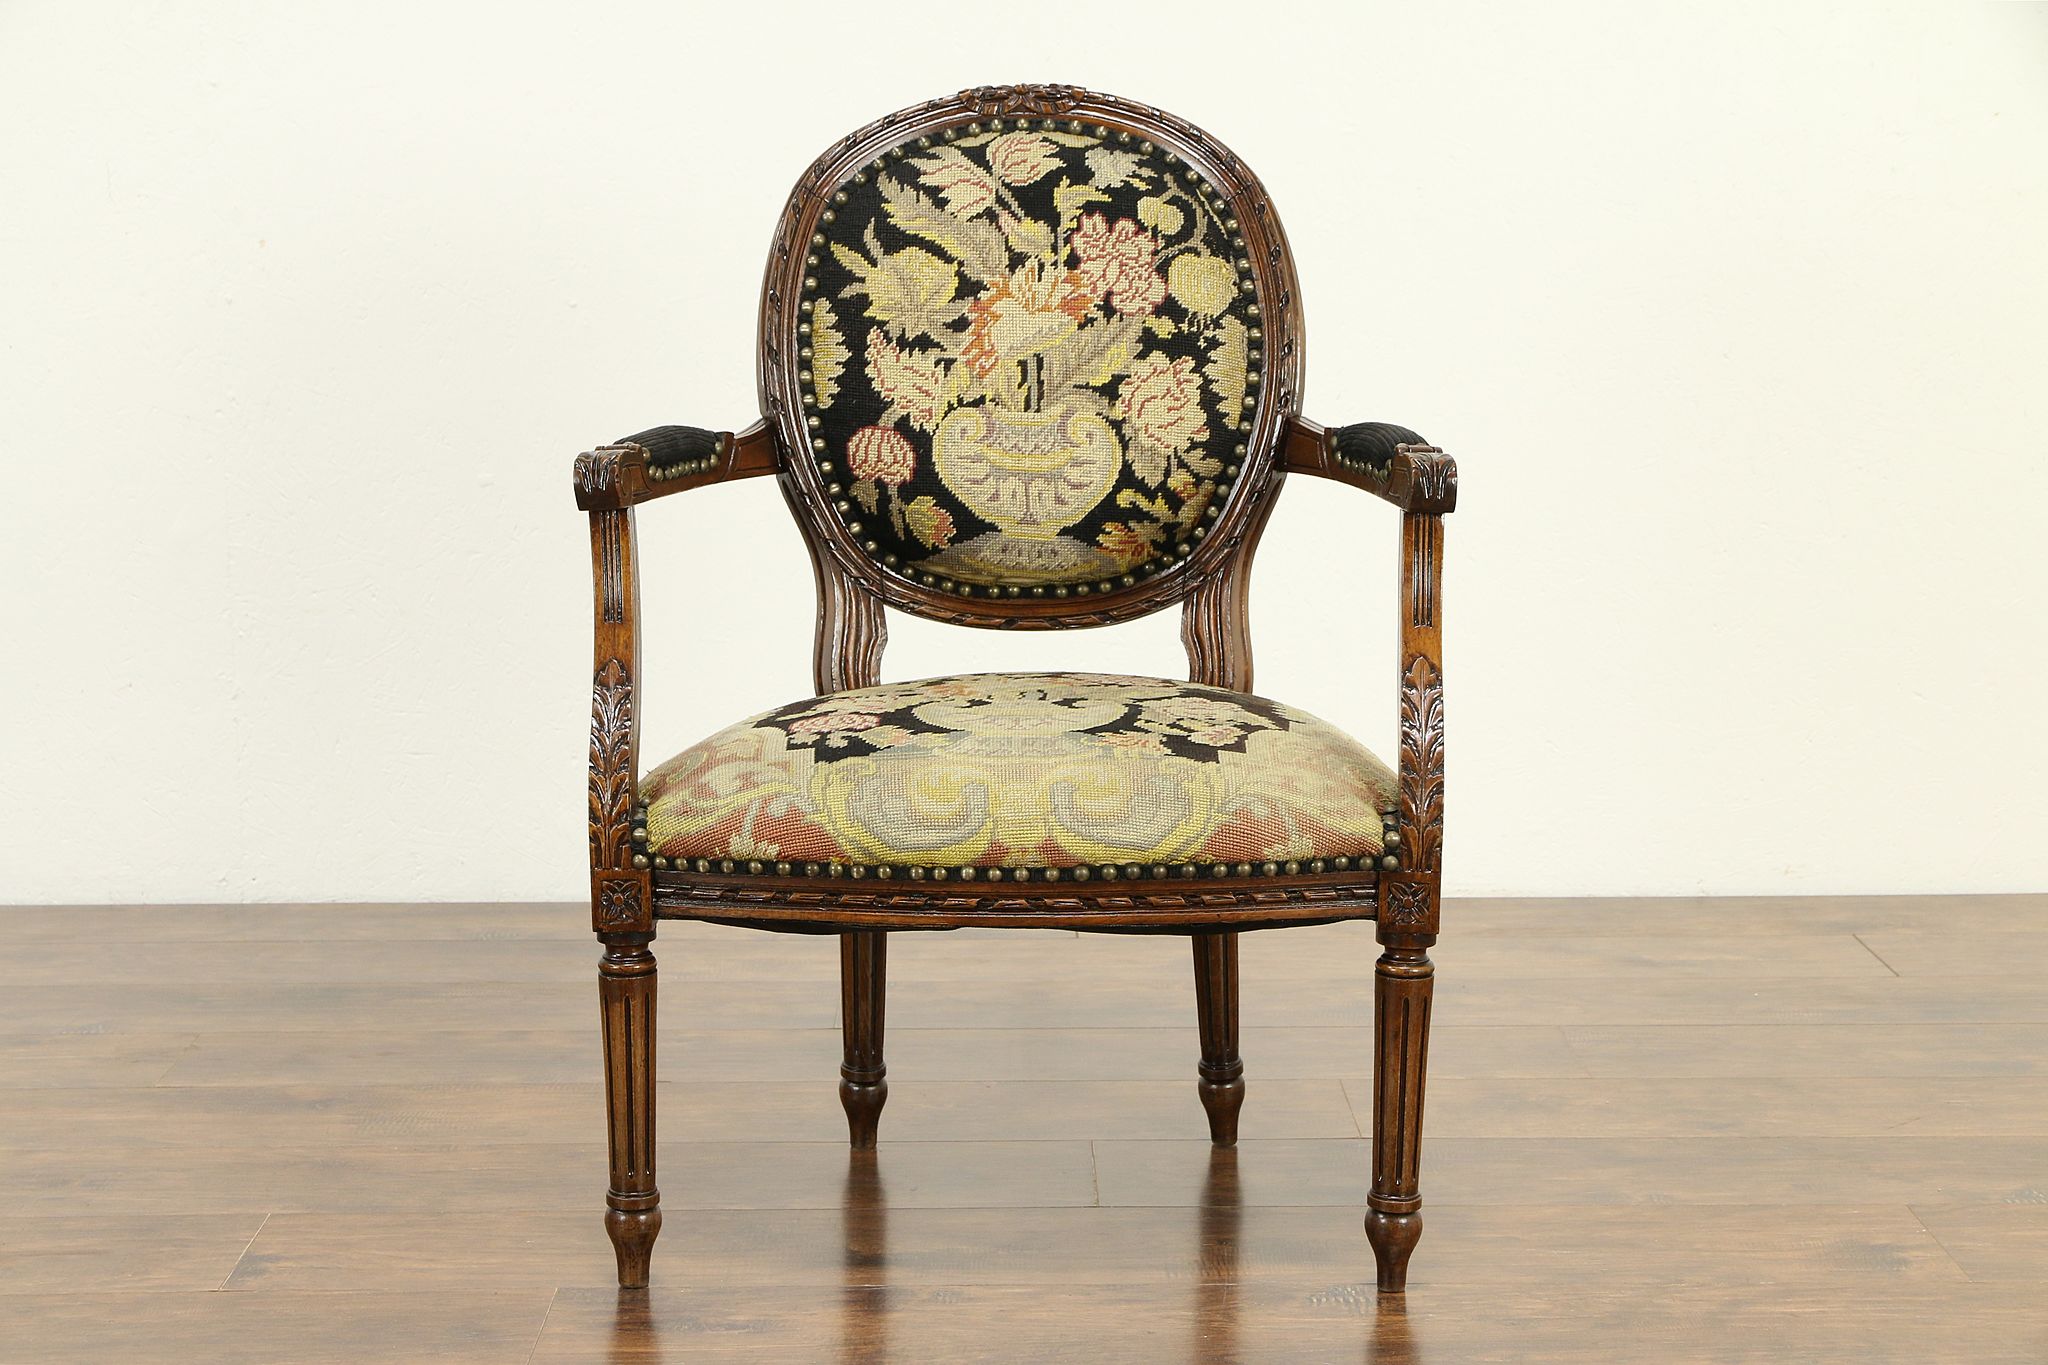 Antique asian style chair